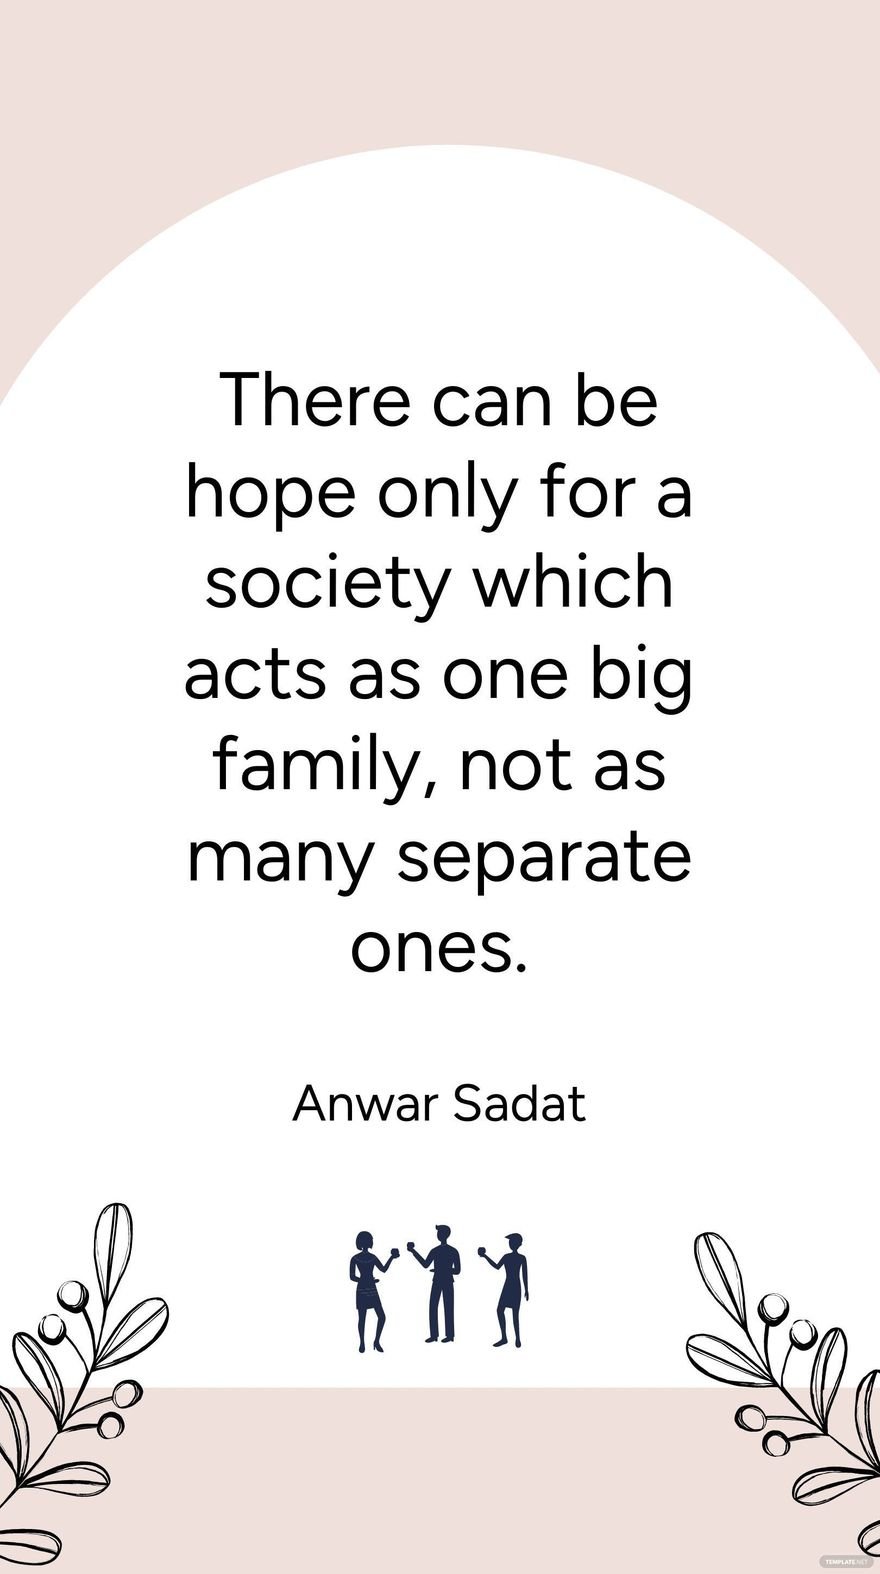 Anwar Sadat - There can be hope only for a society which acts as one big family, not as many separate ones.